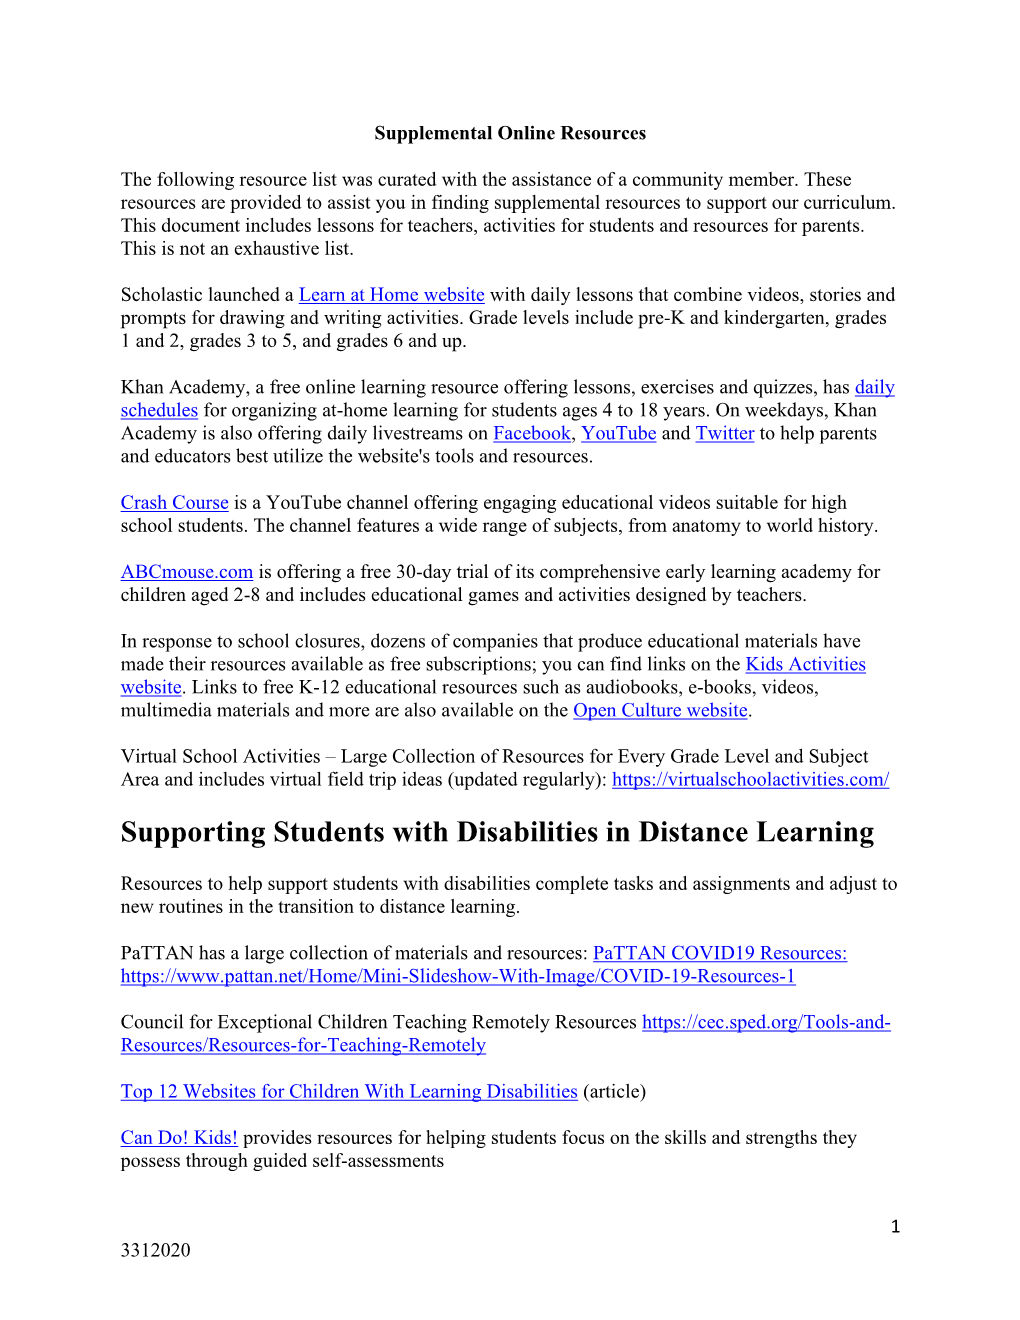 Supporting Students with Disabilities in Distance Learning